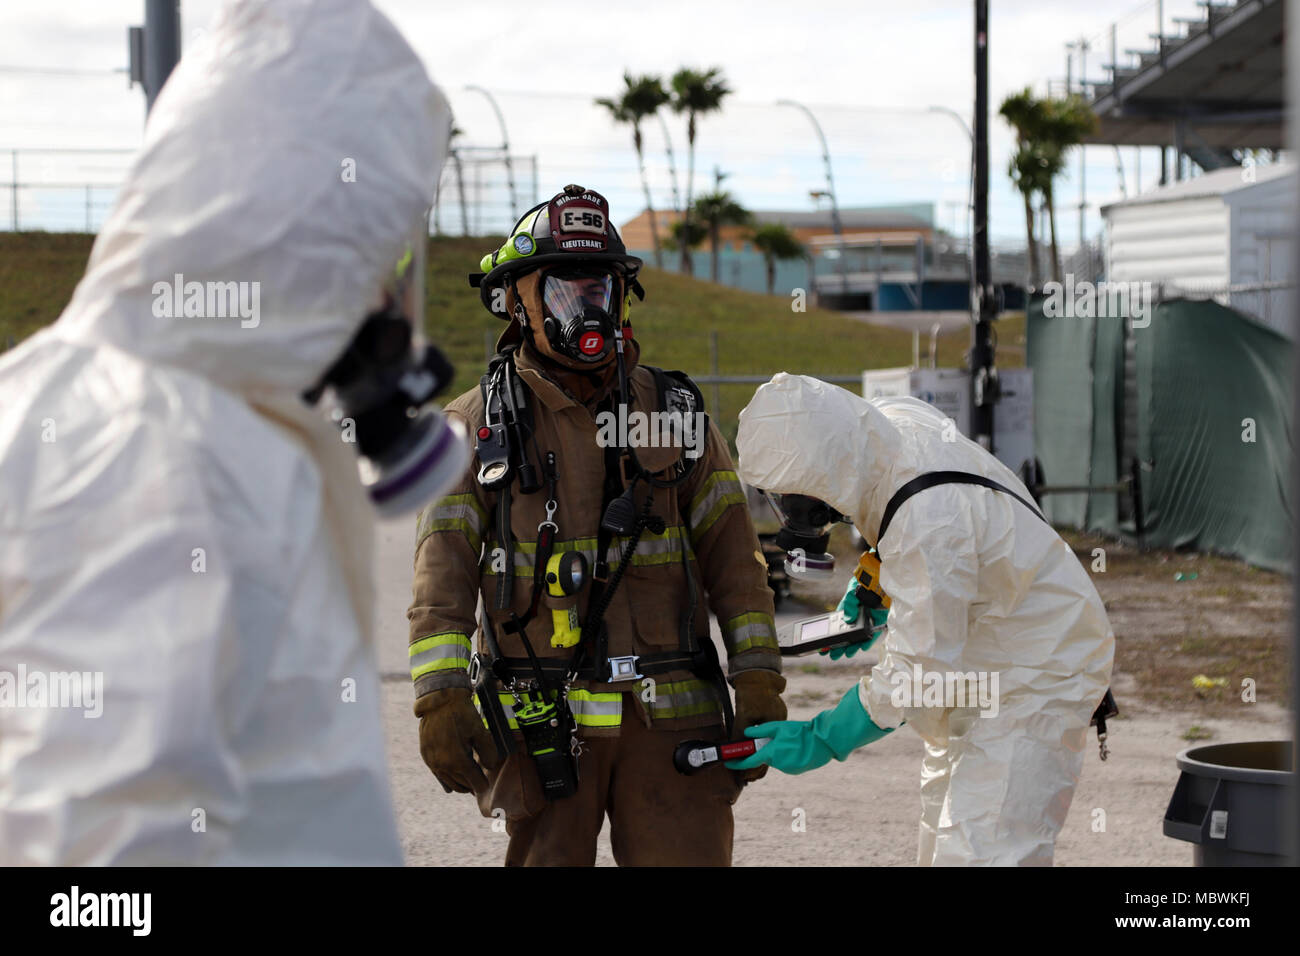 Lieutenant Jose Alfaro of the Miami-Dade Fire Department Hazmat team, holds still while being evaluated by a decontamination crew during a Joint Training Exercise hosted by the Miami-Dade Fire Department and Homestead-Miami Speedway in Miami, Fla. Jan. 11, 2018. This JTE focused on building response capabilities and seamless the transition between the local first responders and the follow-on support provided by the National Guard and Active duty soldiers. (U. S. Army Photo by Spc. Samuel Brooks) Stock Photo